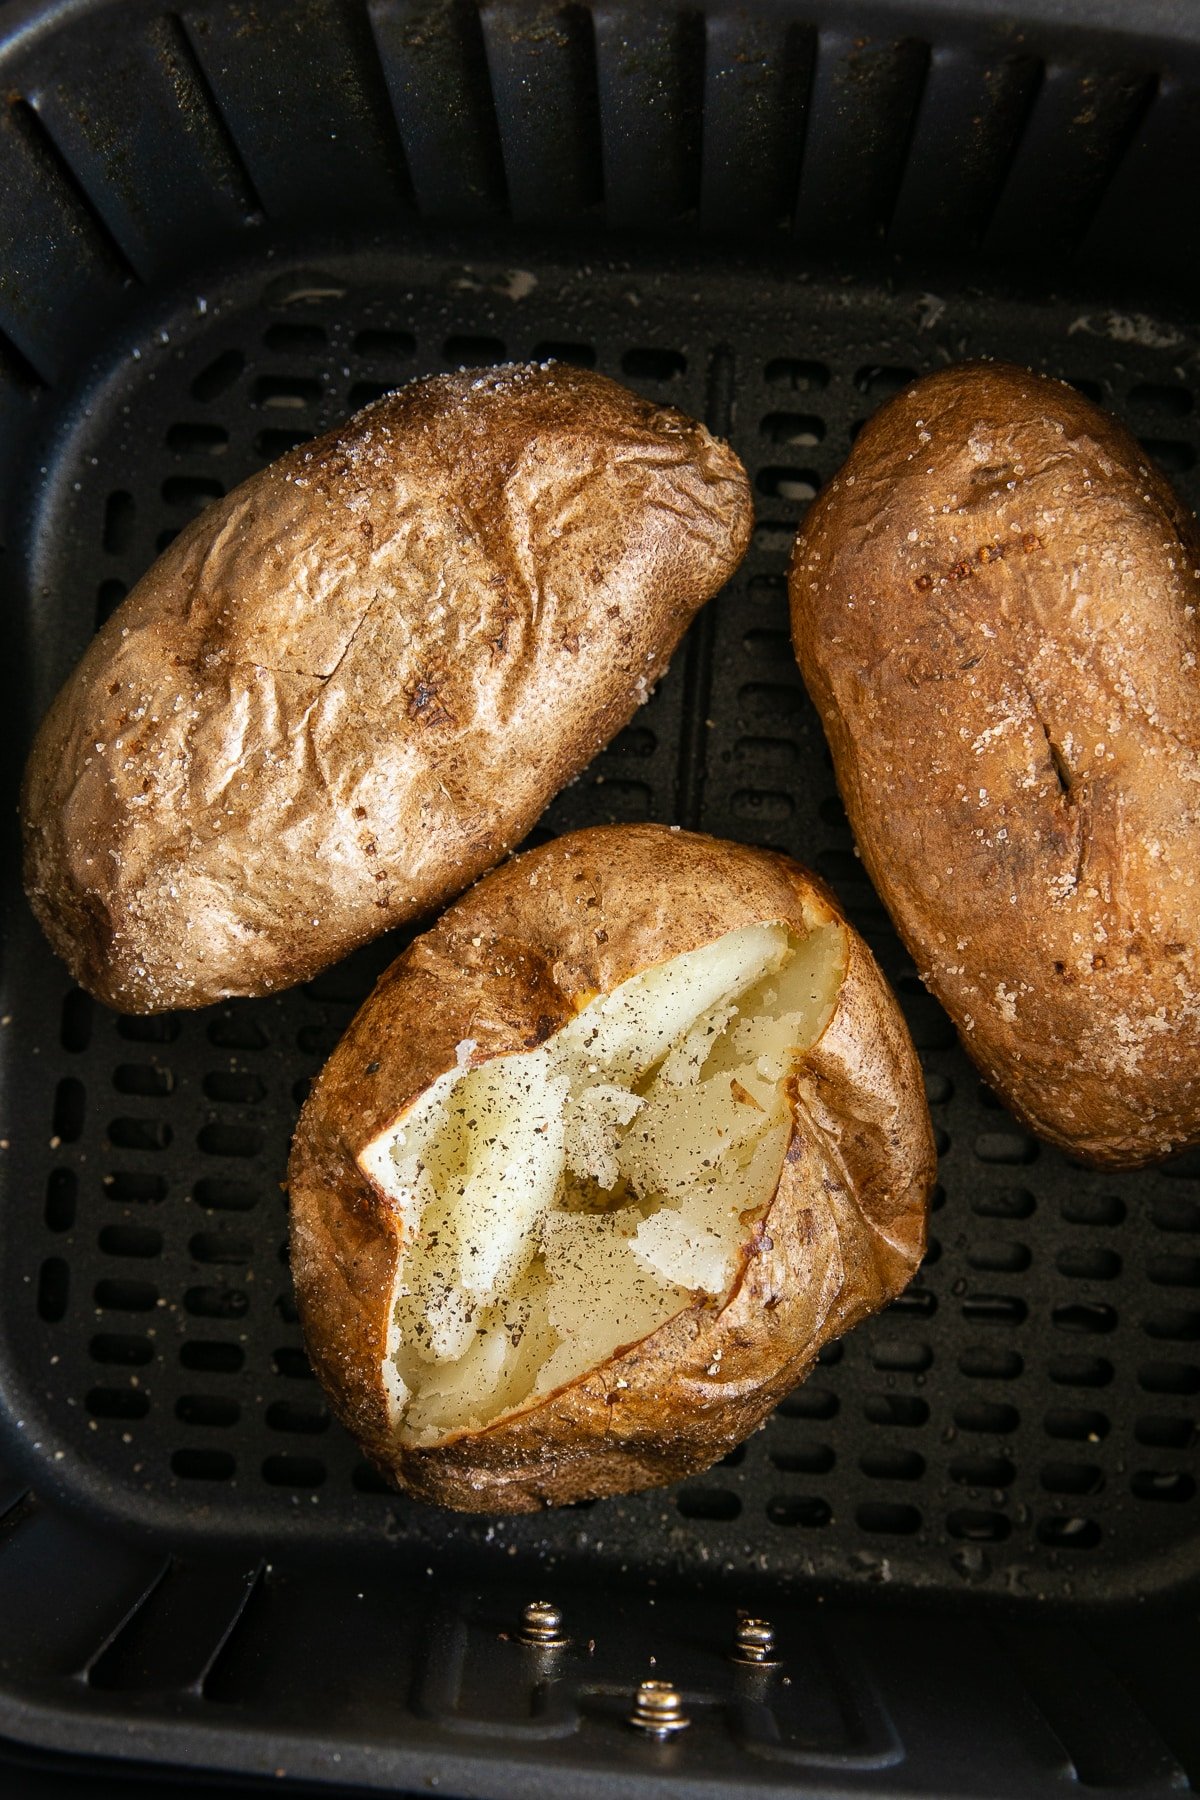 Three cooked baked potatoes in an air fryer basket.